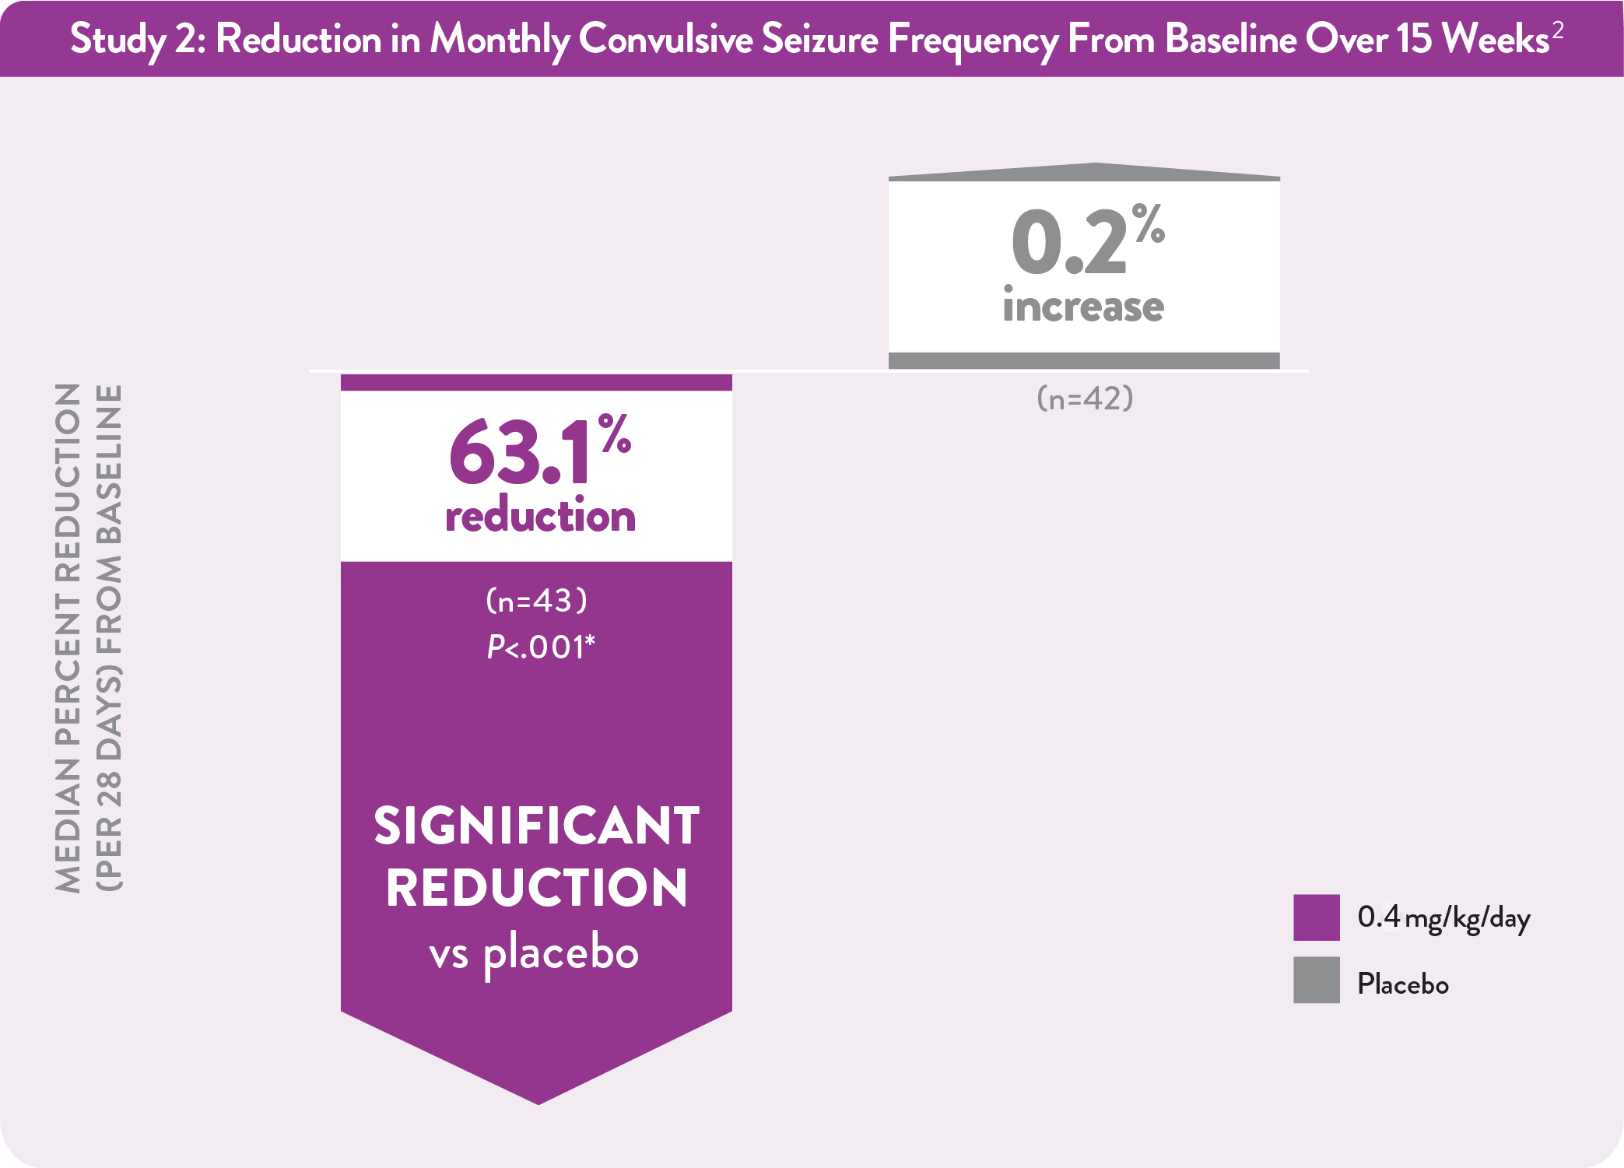 Graph showing 63.1% reduction in seizure activity from baseline over a 15-week period vs placebo.